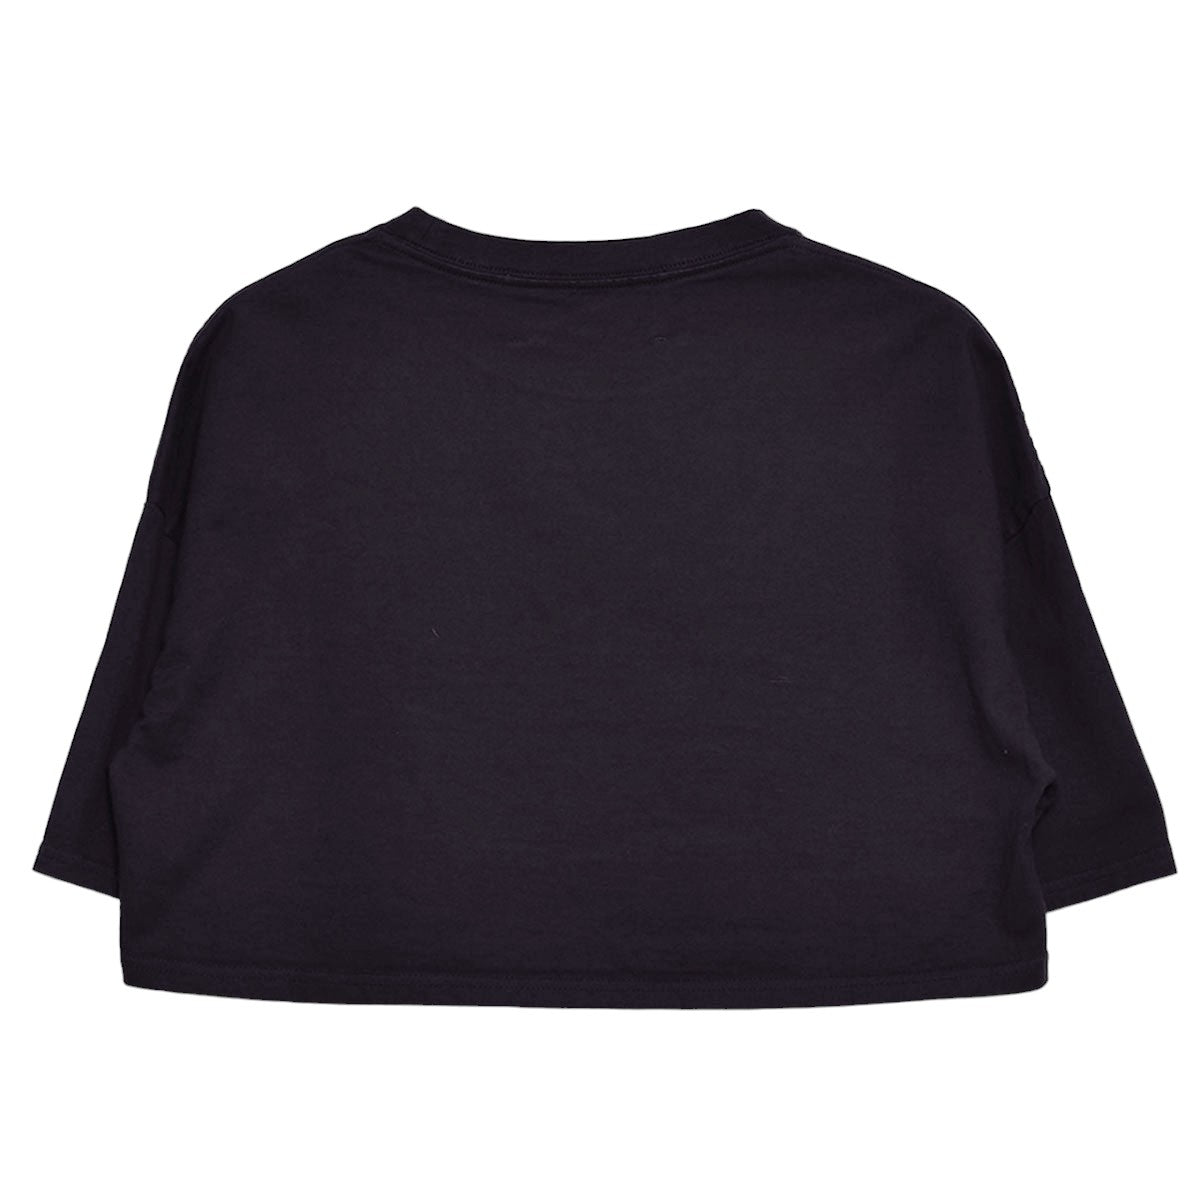 TODAYFUL]Cropped Cotton T-shirts/CHARCOAL GRAY(12410605) – Ru0026Co.